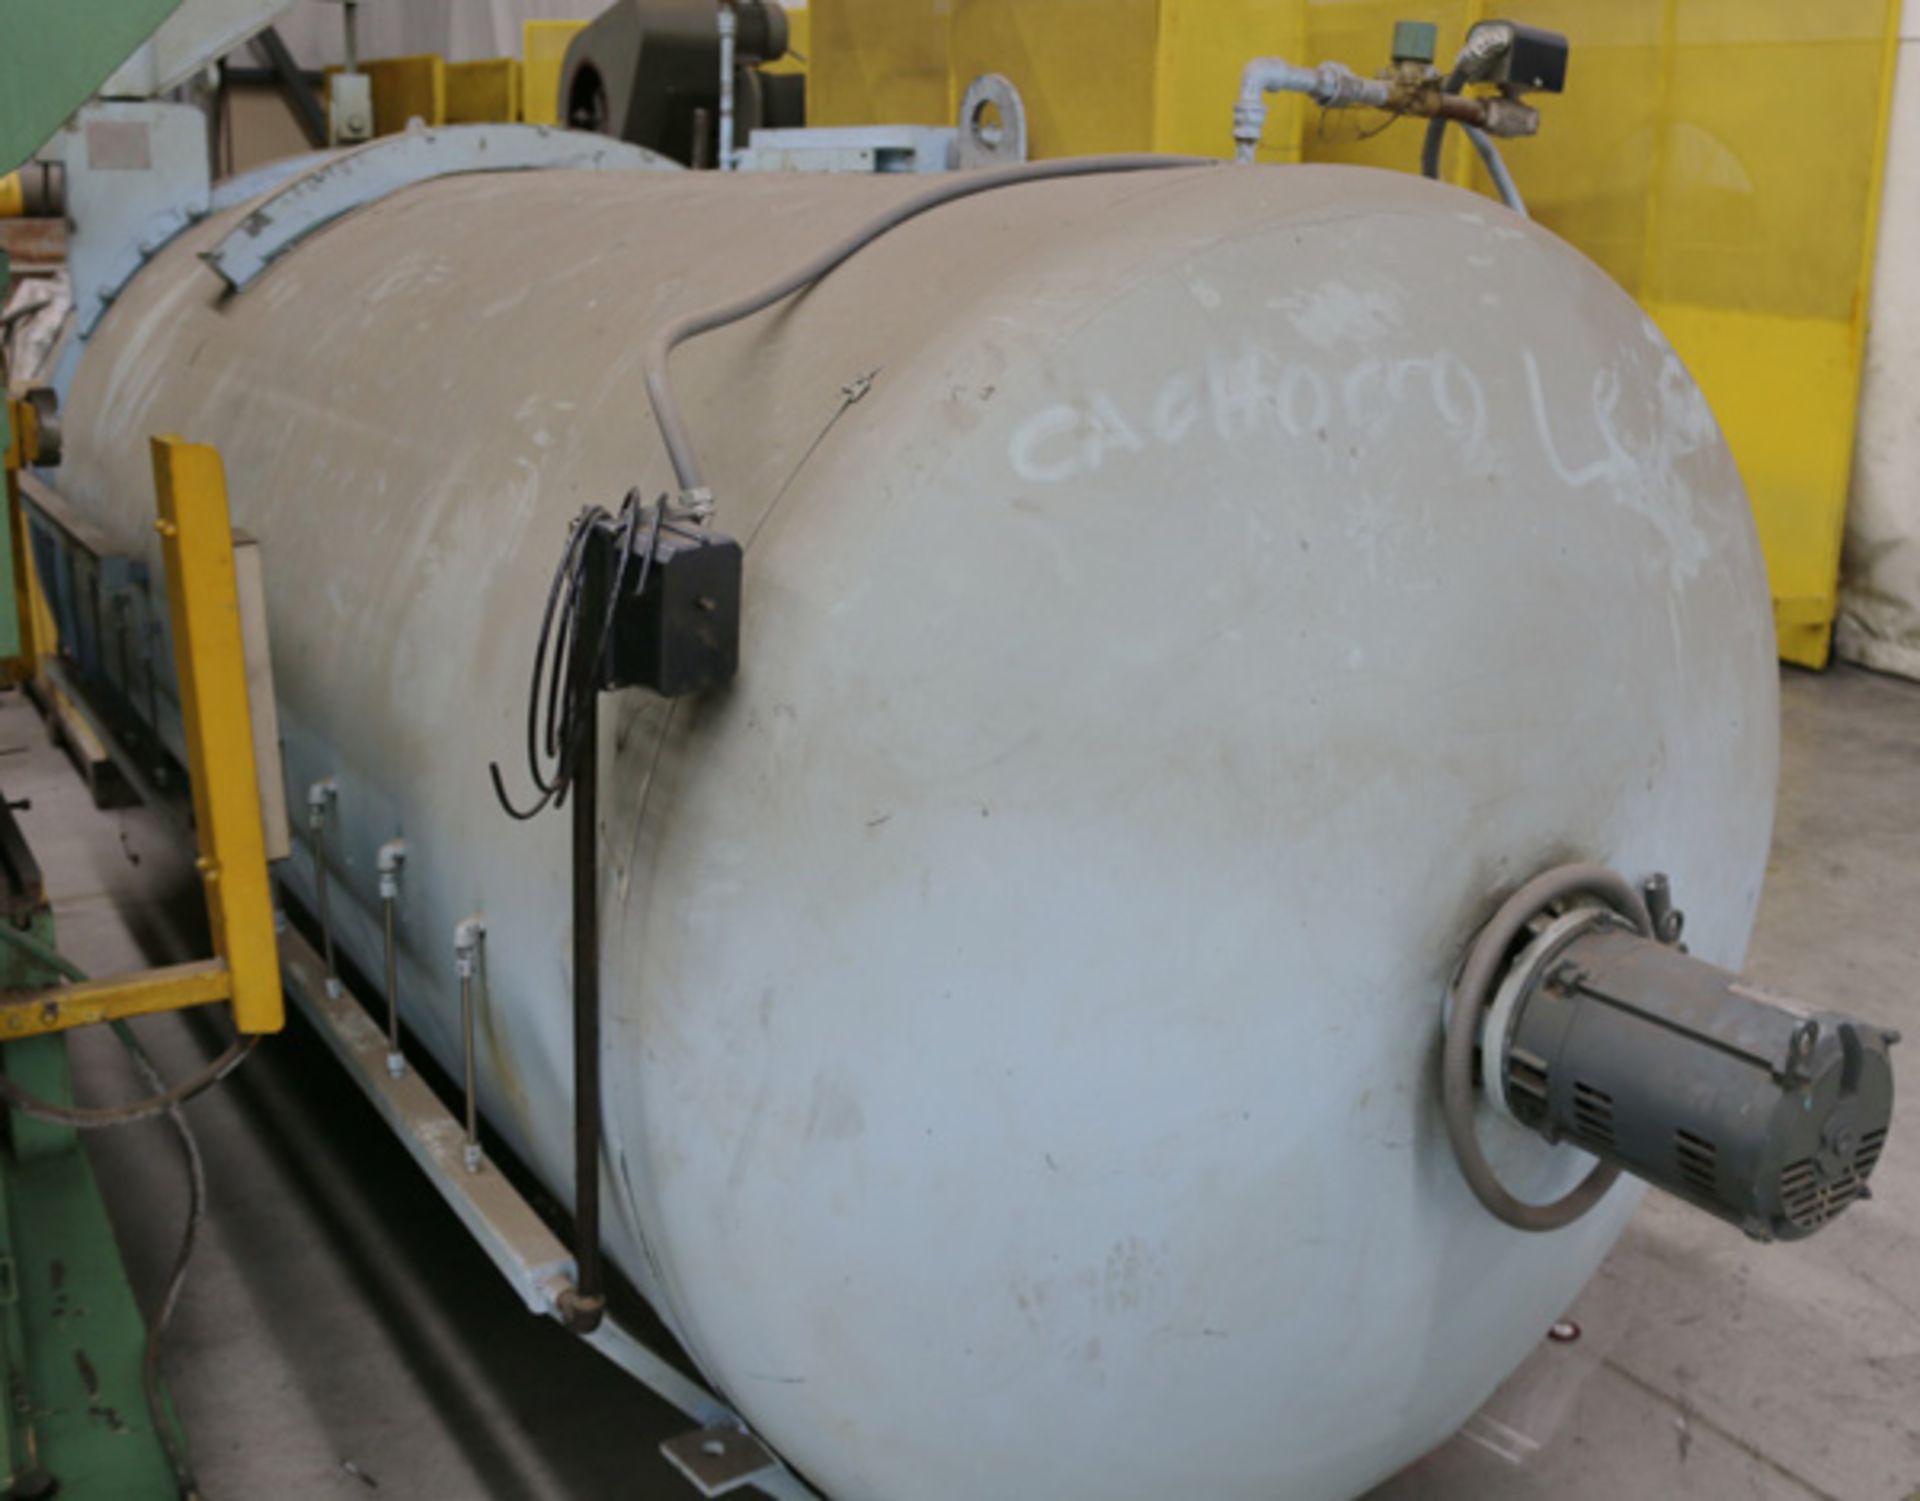 Bandag Heated Autoclave | 36" x 120" x 300 Degrees F, Located In: Huntington Park, CA - 8530HP - Image 2 of 9